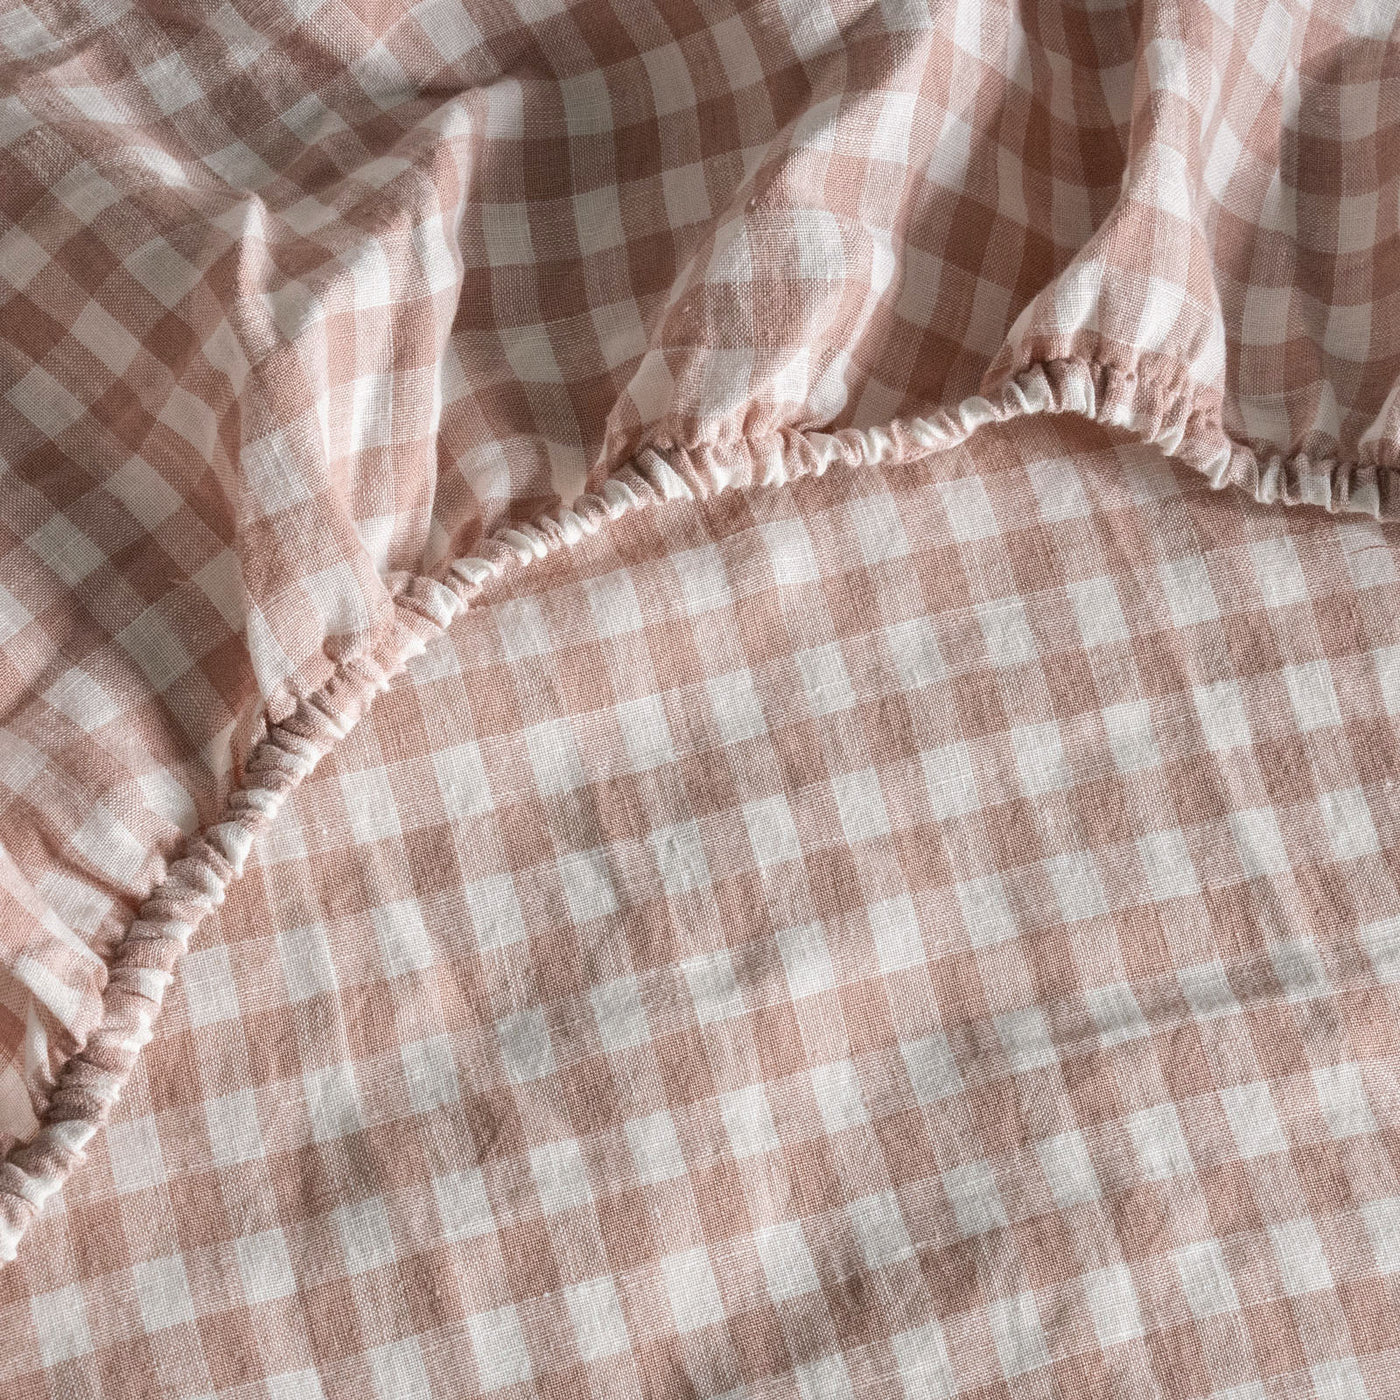 French Flax Linen Fitted Sheet in Clay Gingham